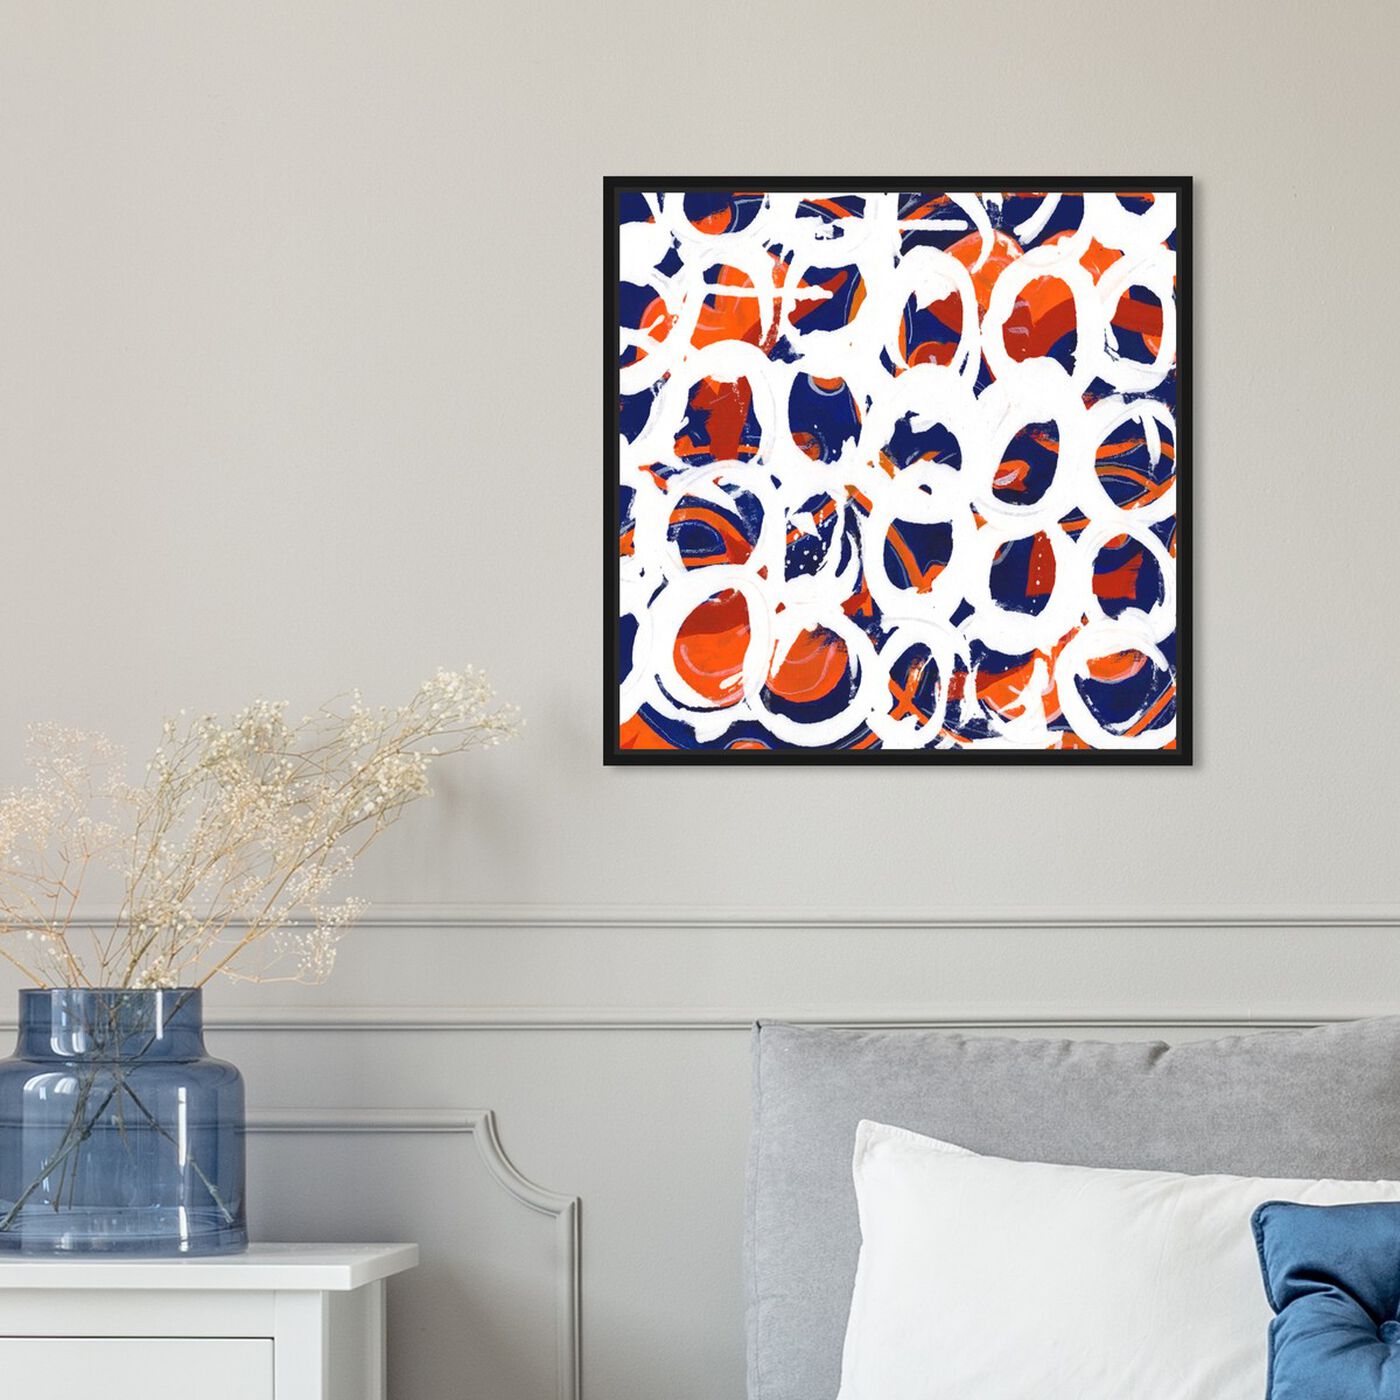 Hanging view of Waltz featuring abstract and geometric art.